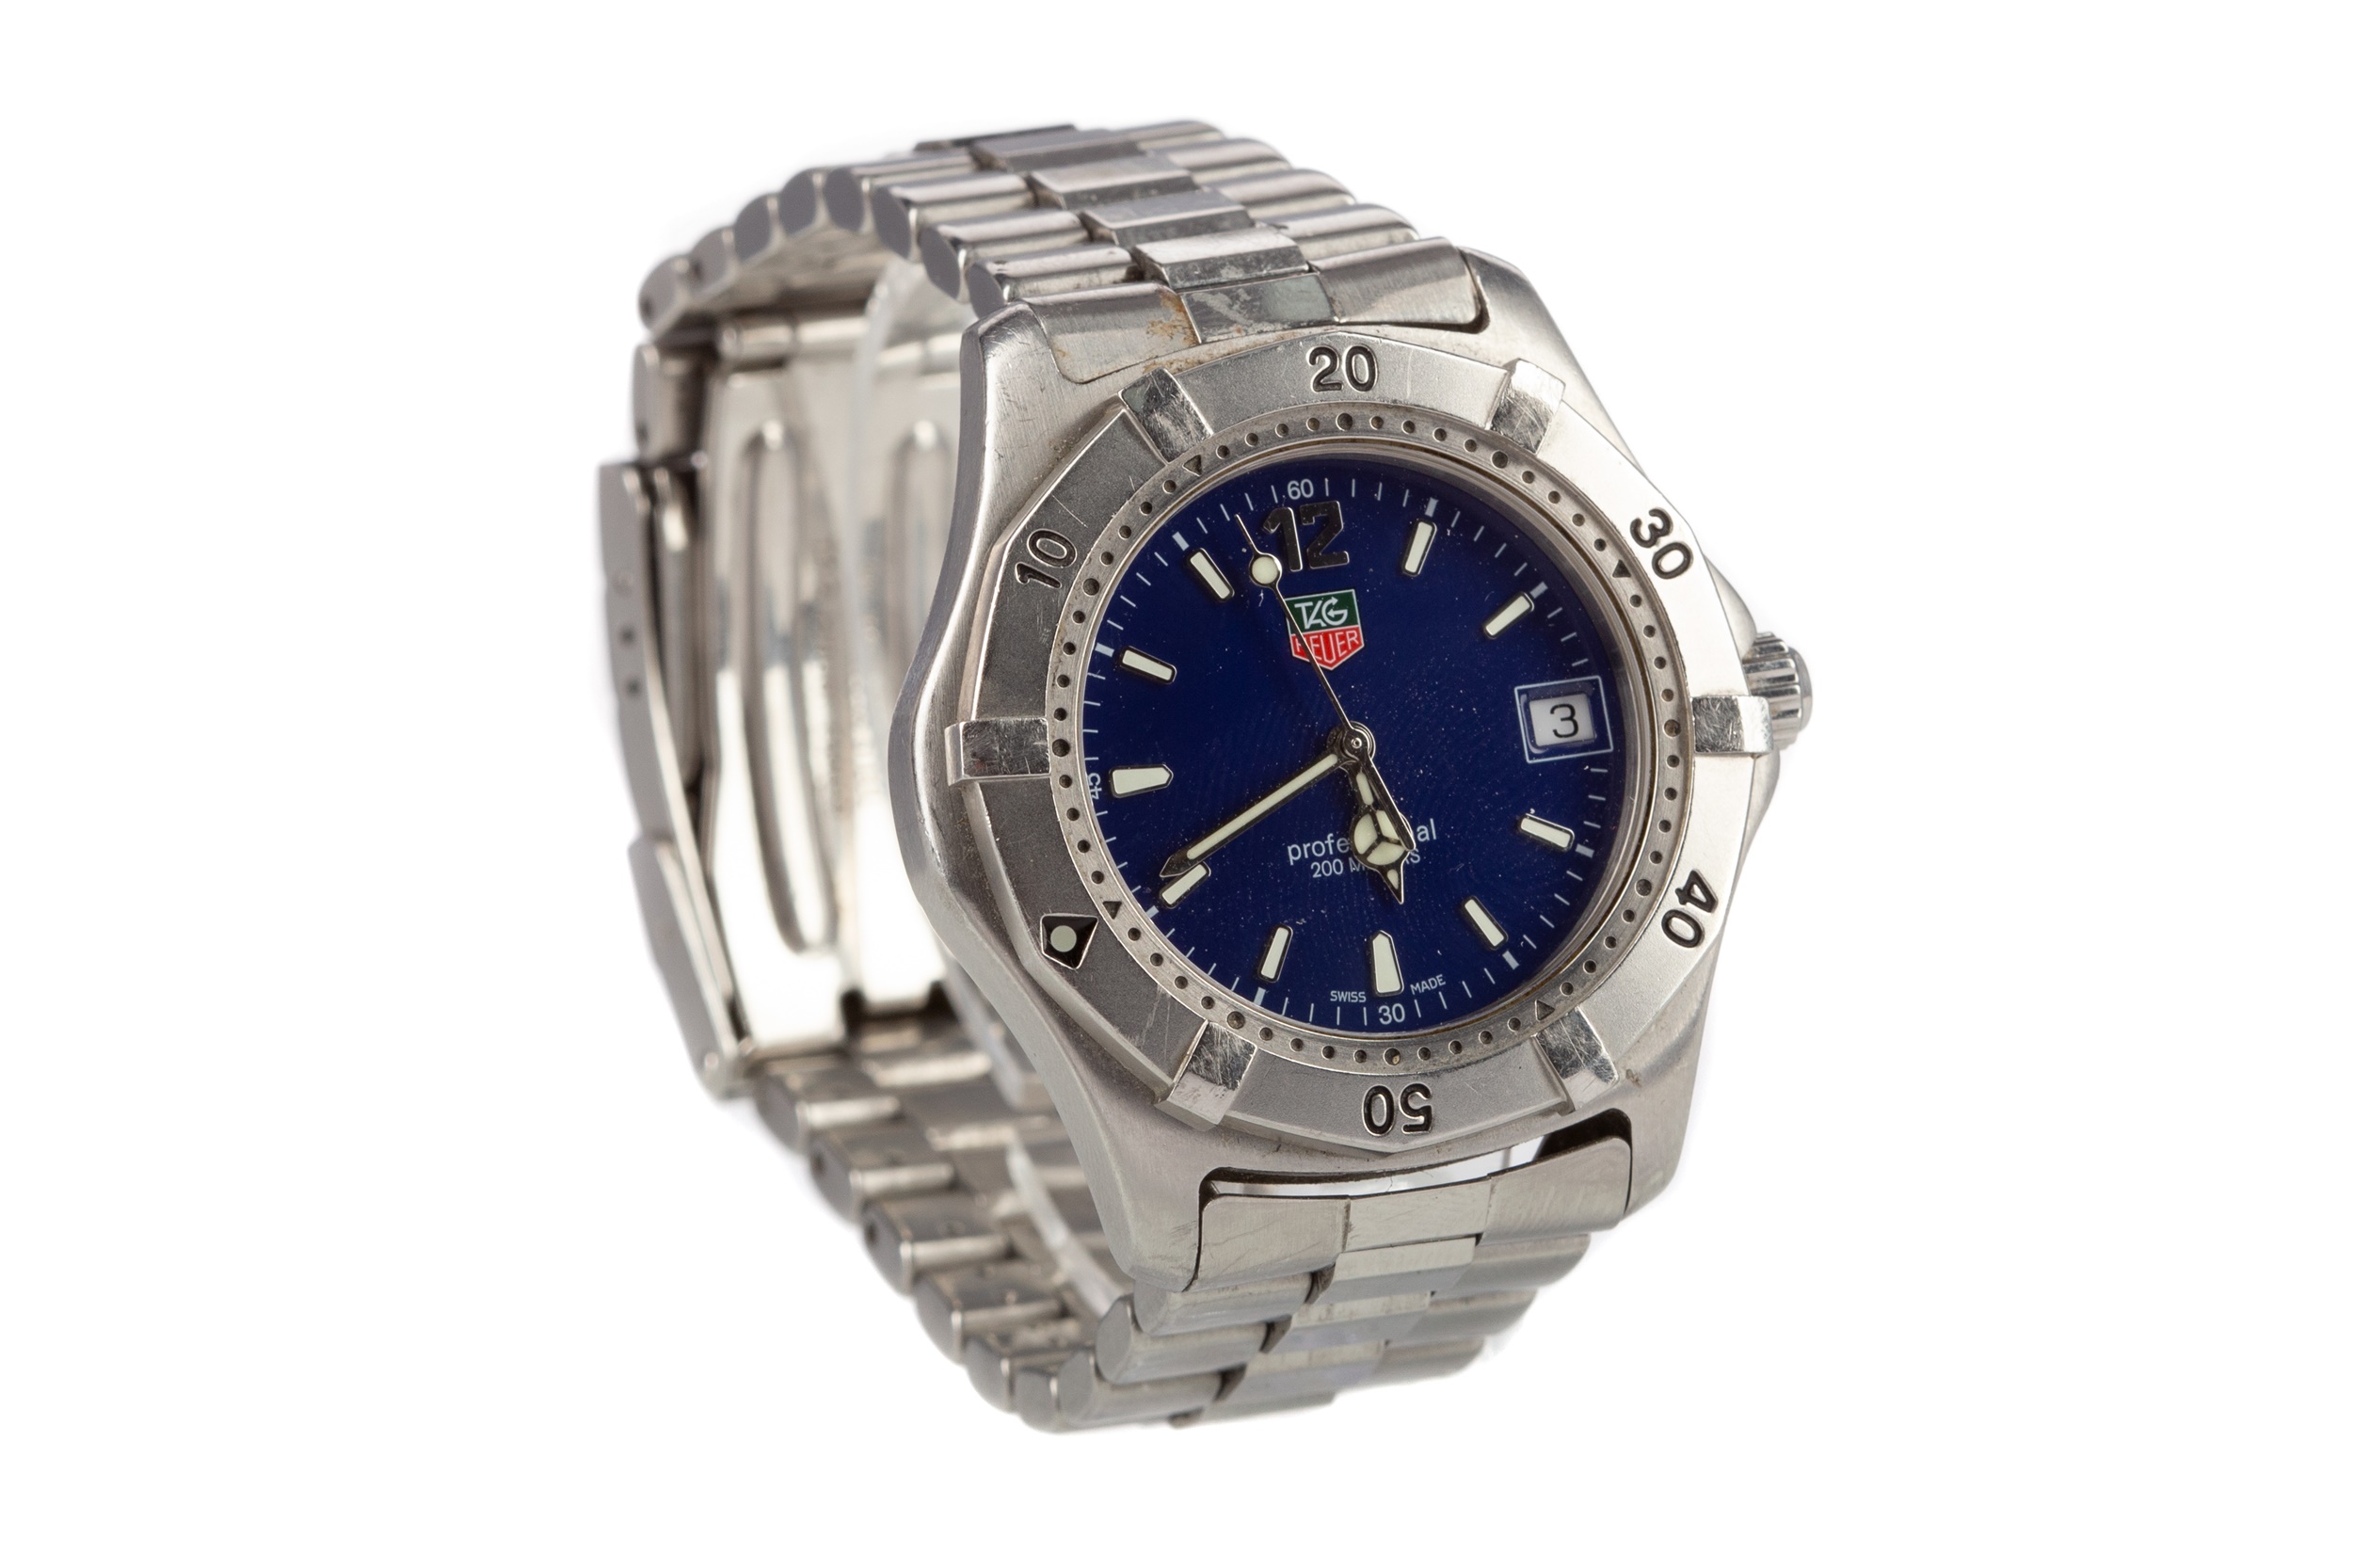 A GENTLEMAN'S TAG HEUER PROFESSIONAL STAINLESS STEEL QUARTZ WRIST WATCH - Image 2 of 2